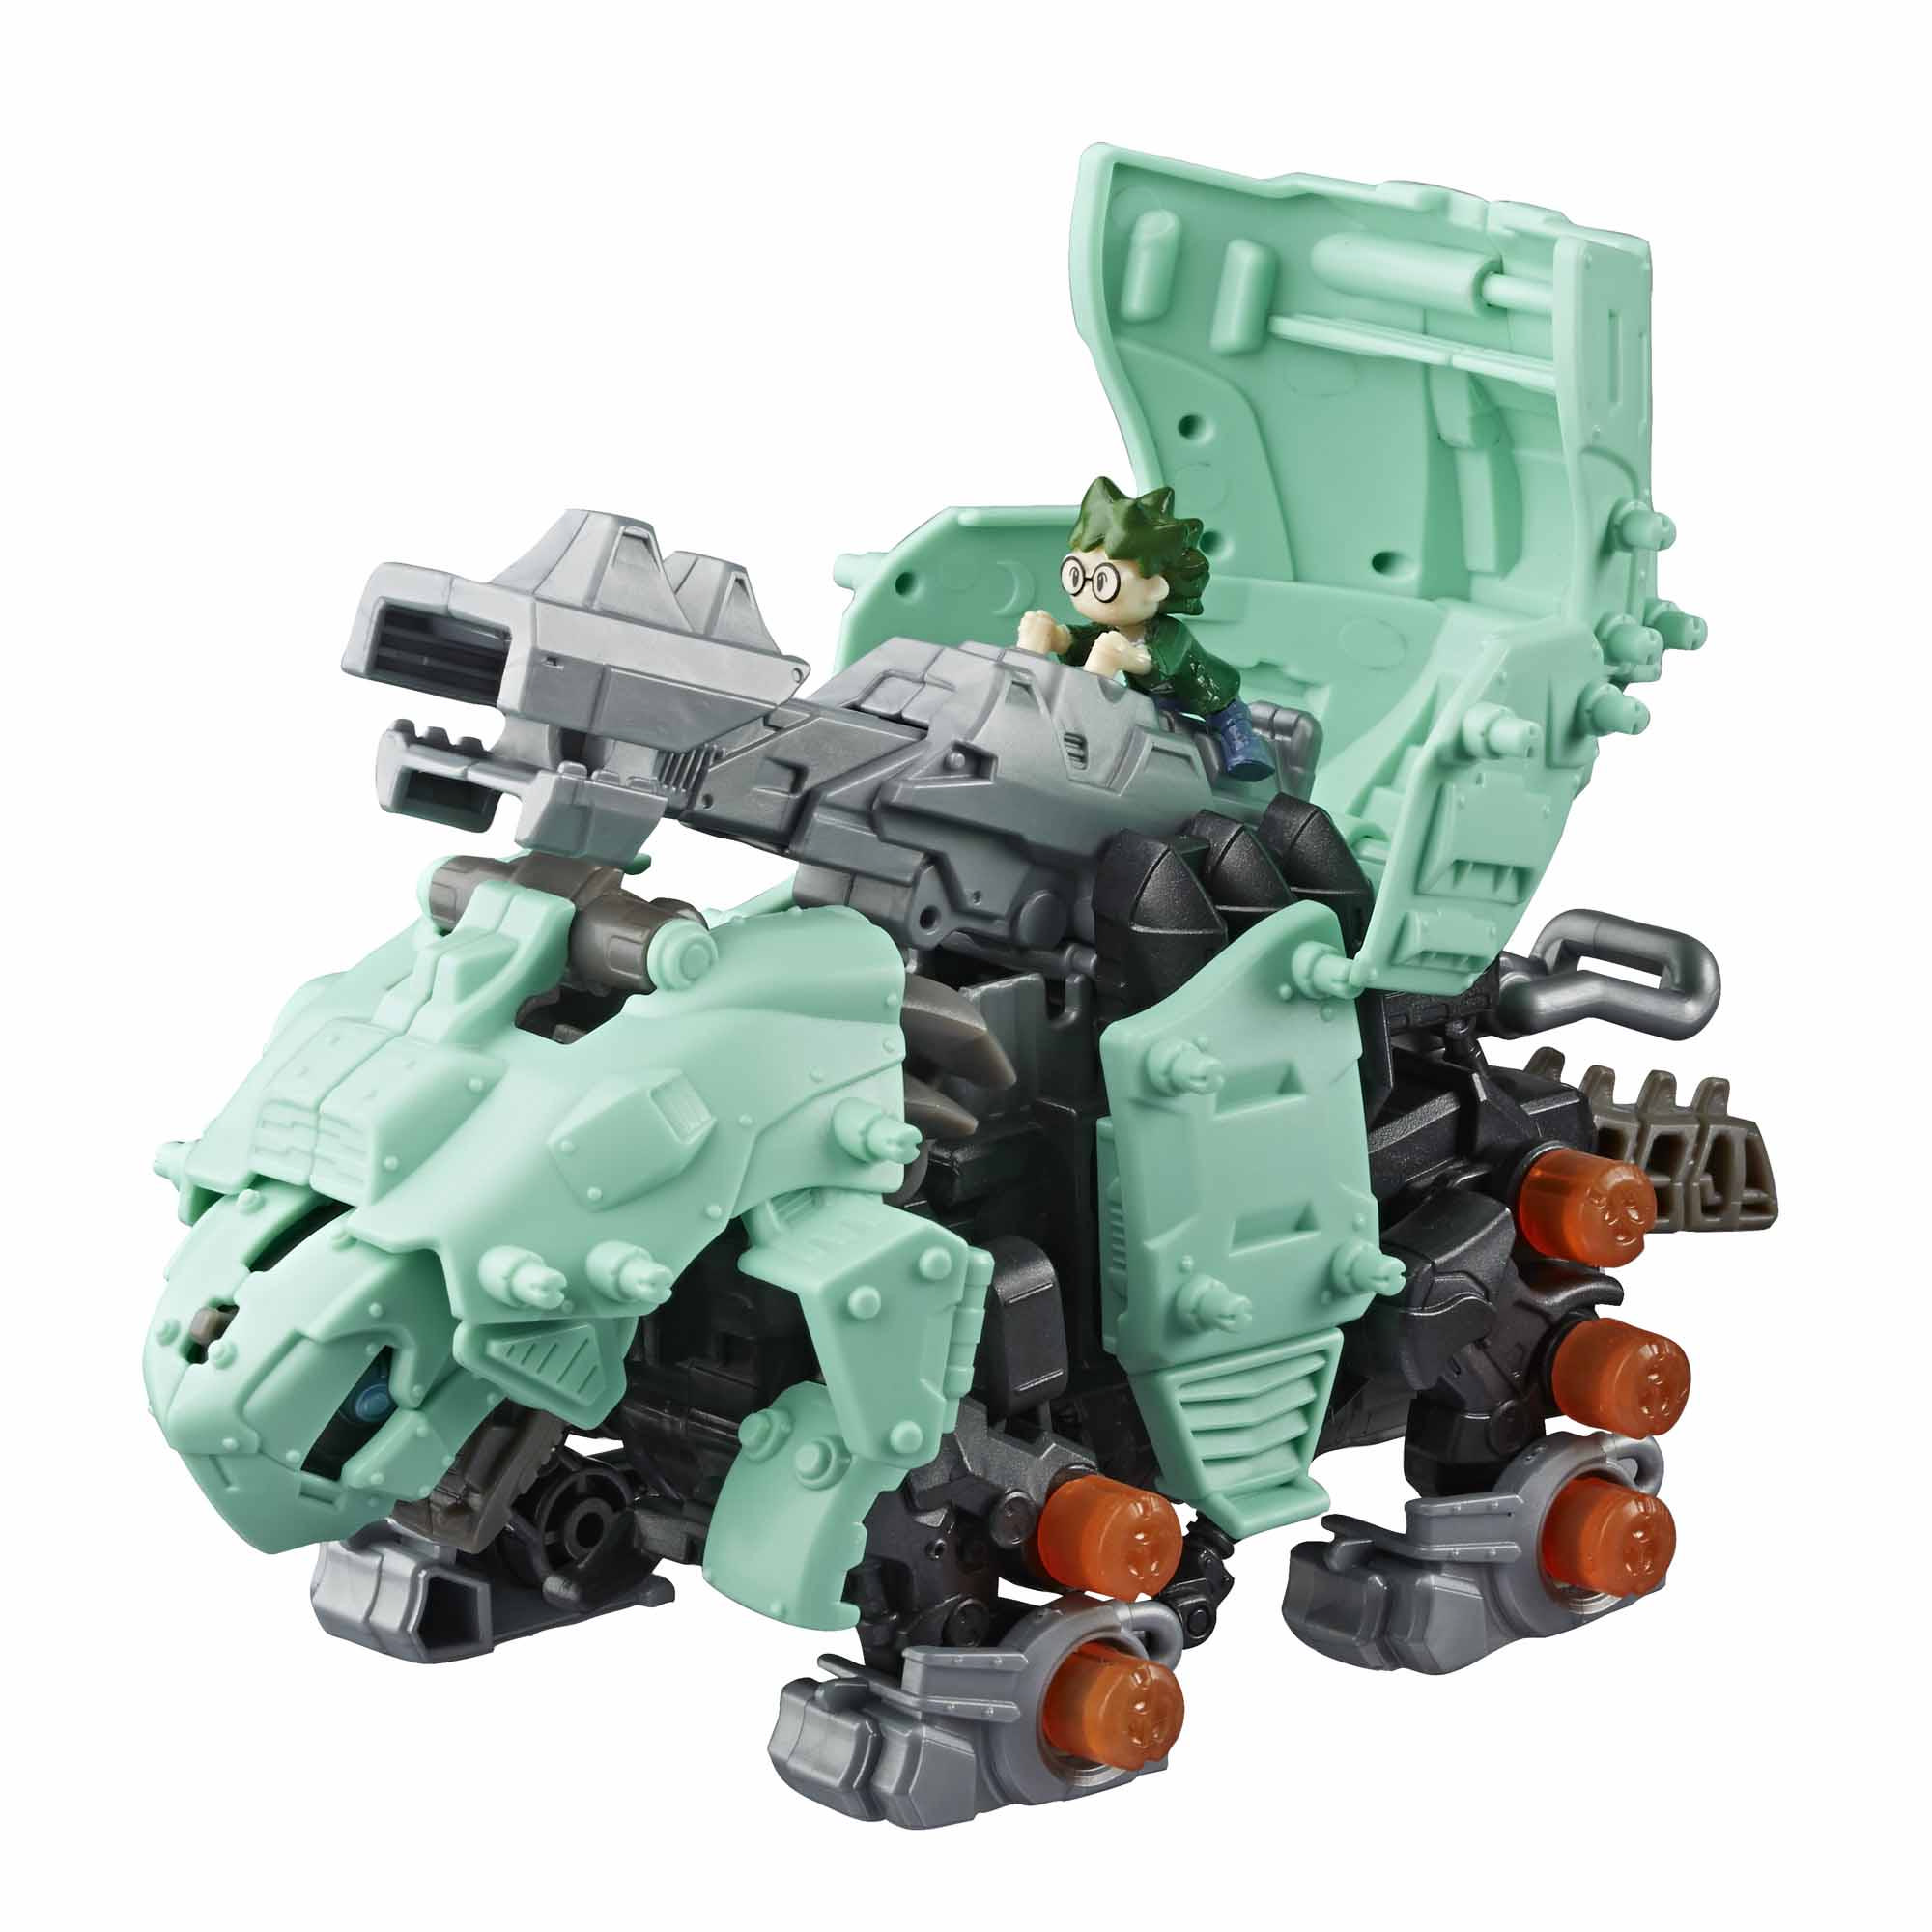 Zoids Mega Battlers Tanks - Turtle-Type Buildable Beast Figure, Motorized Motion - Kids Toys Ages 8 and Up, 53 Pieces